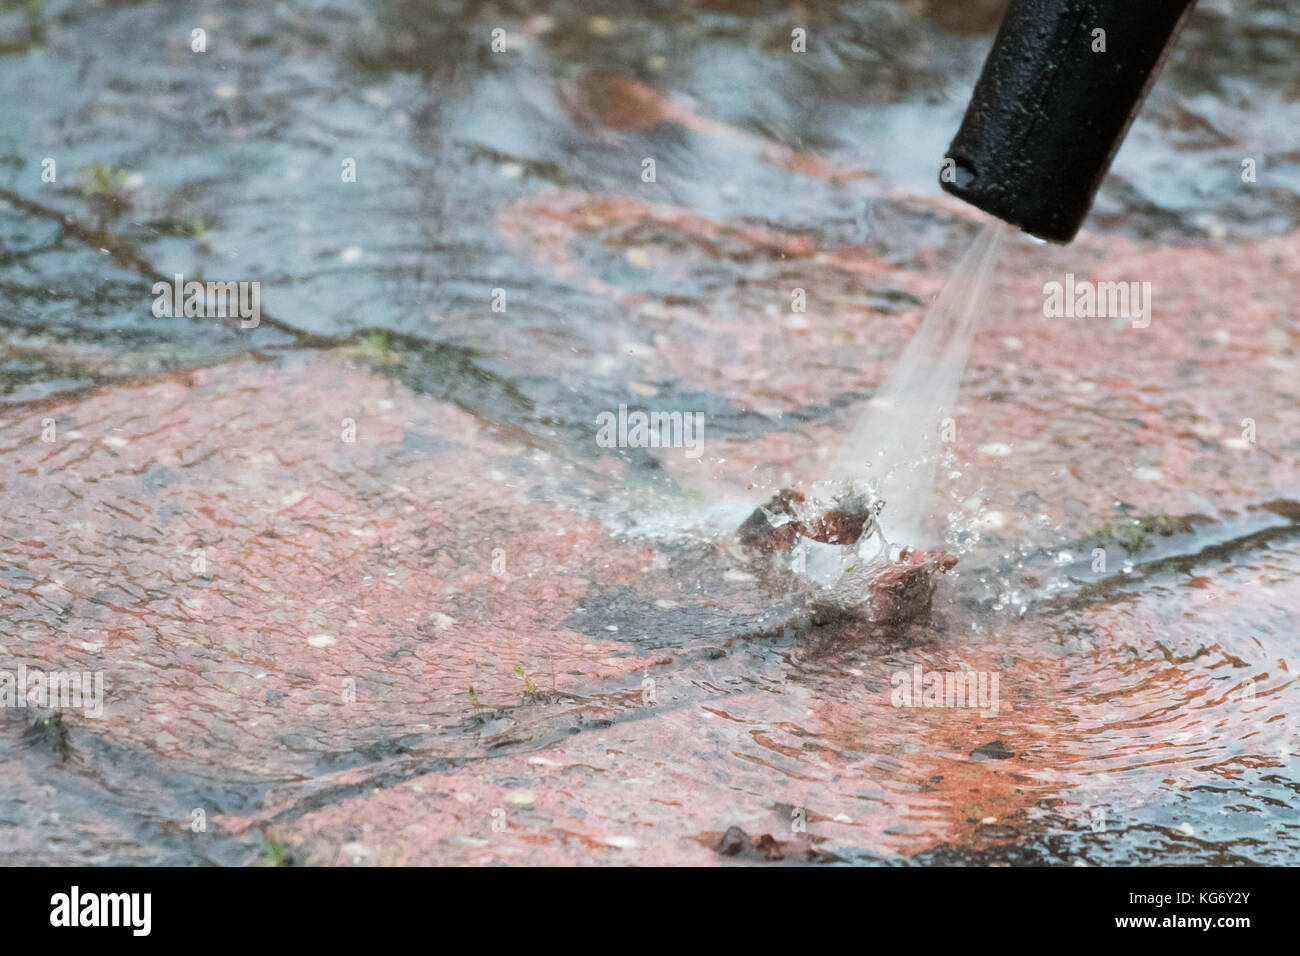 pressure washer being used badly causing damage to mortar on patio Stock Photo